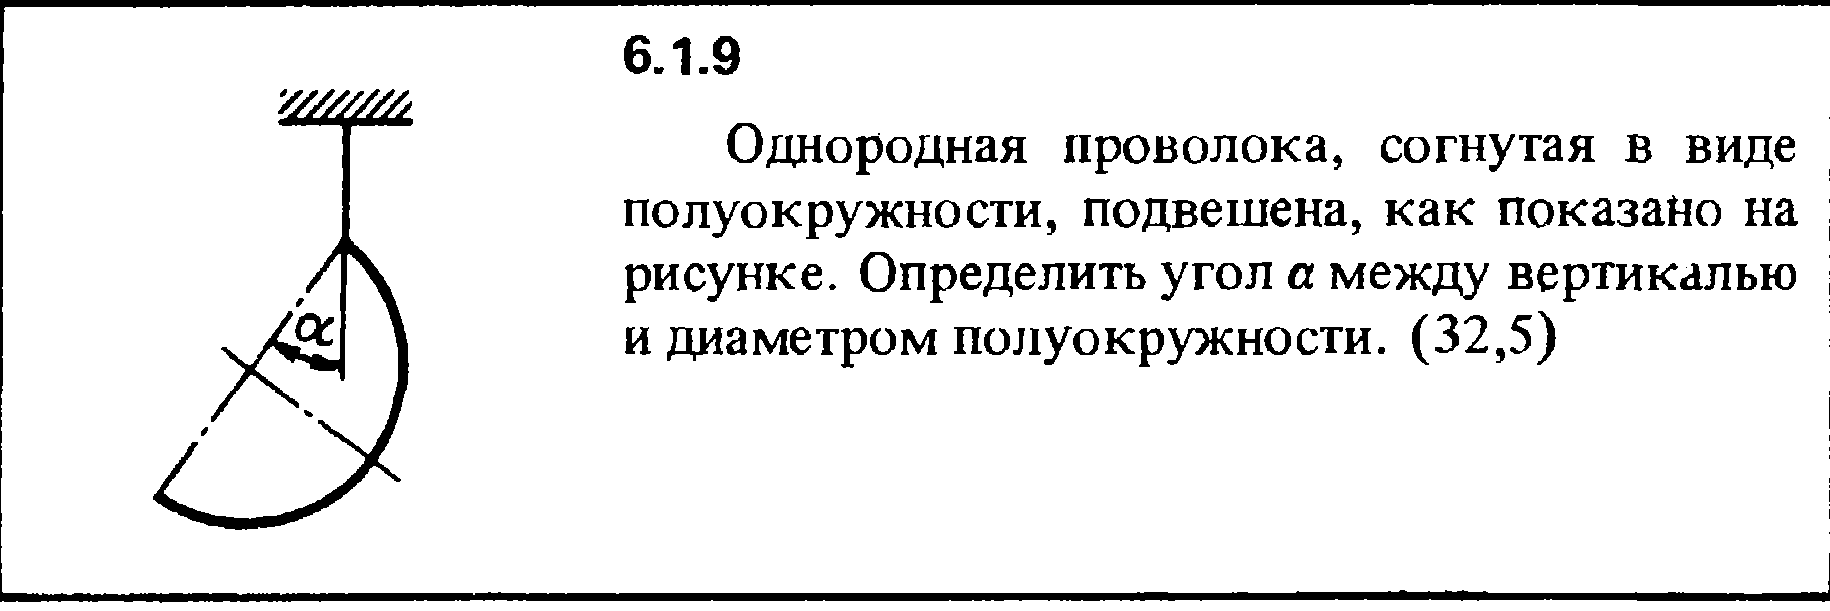 6.1.9 The solution of the problem of the collection of